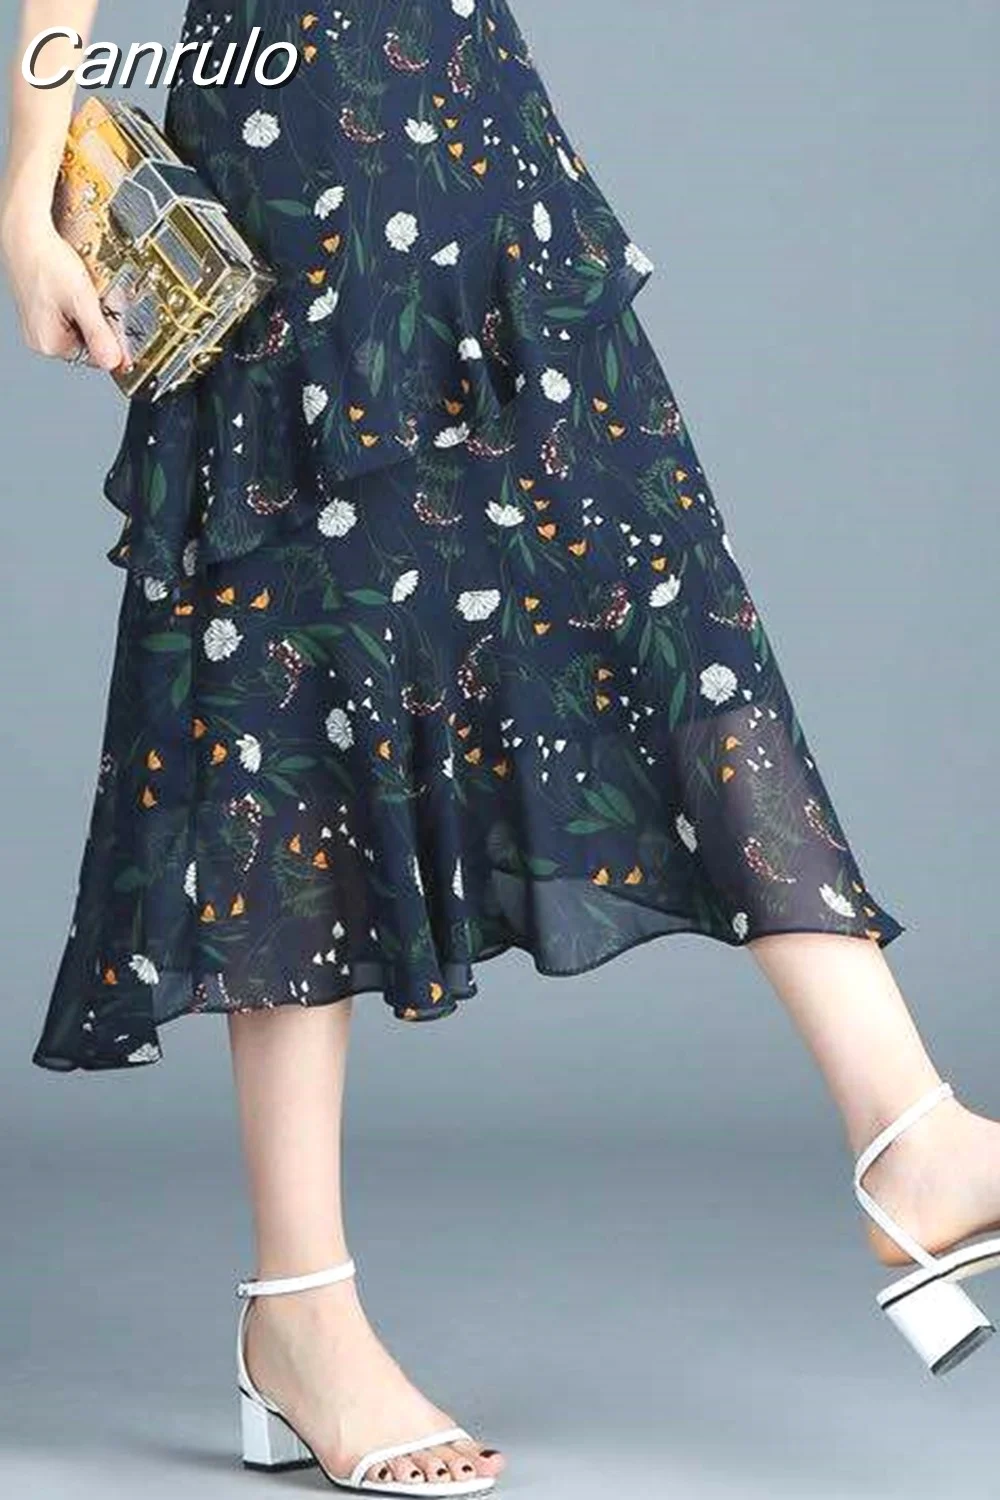 Canrulo Skirt Spring Summer New Printing Floral Popularity High Waist Ruffles Ankle-Length Vintage Office Lady Elegant Fashion